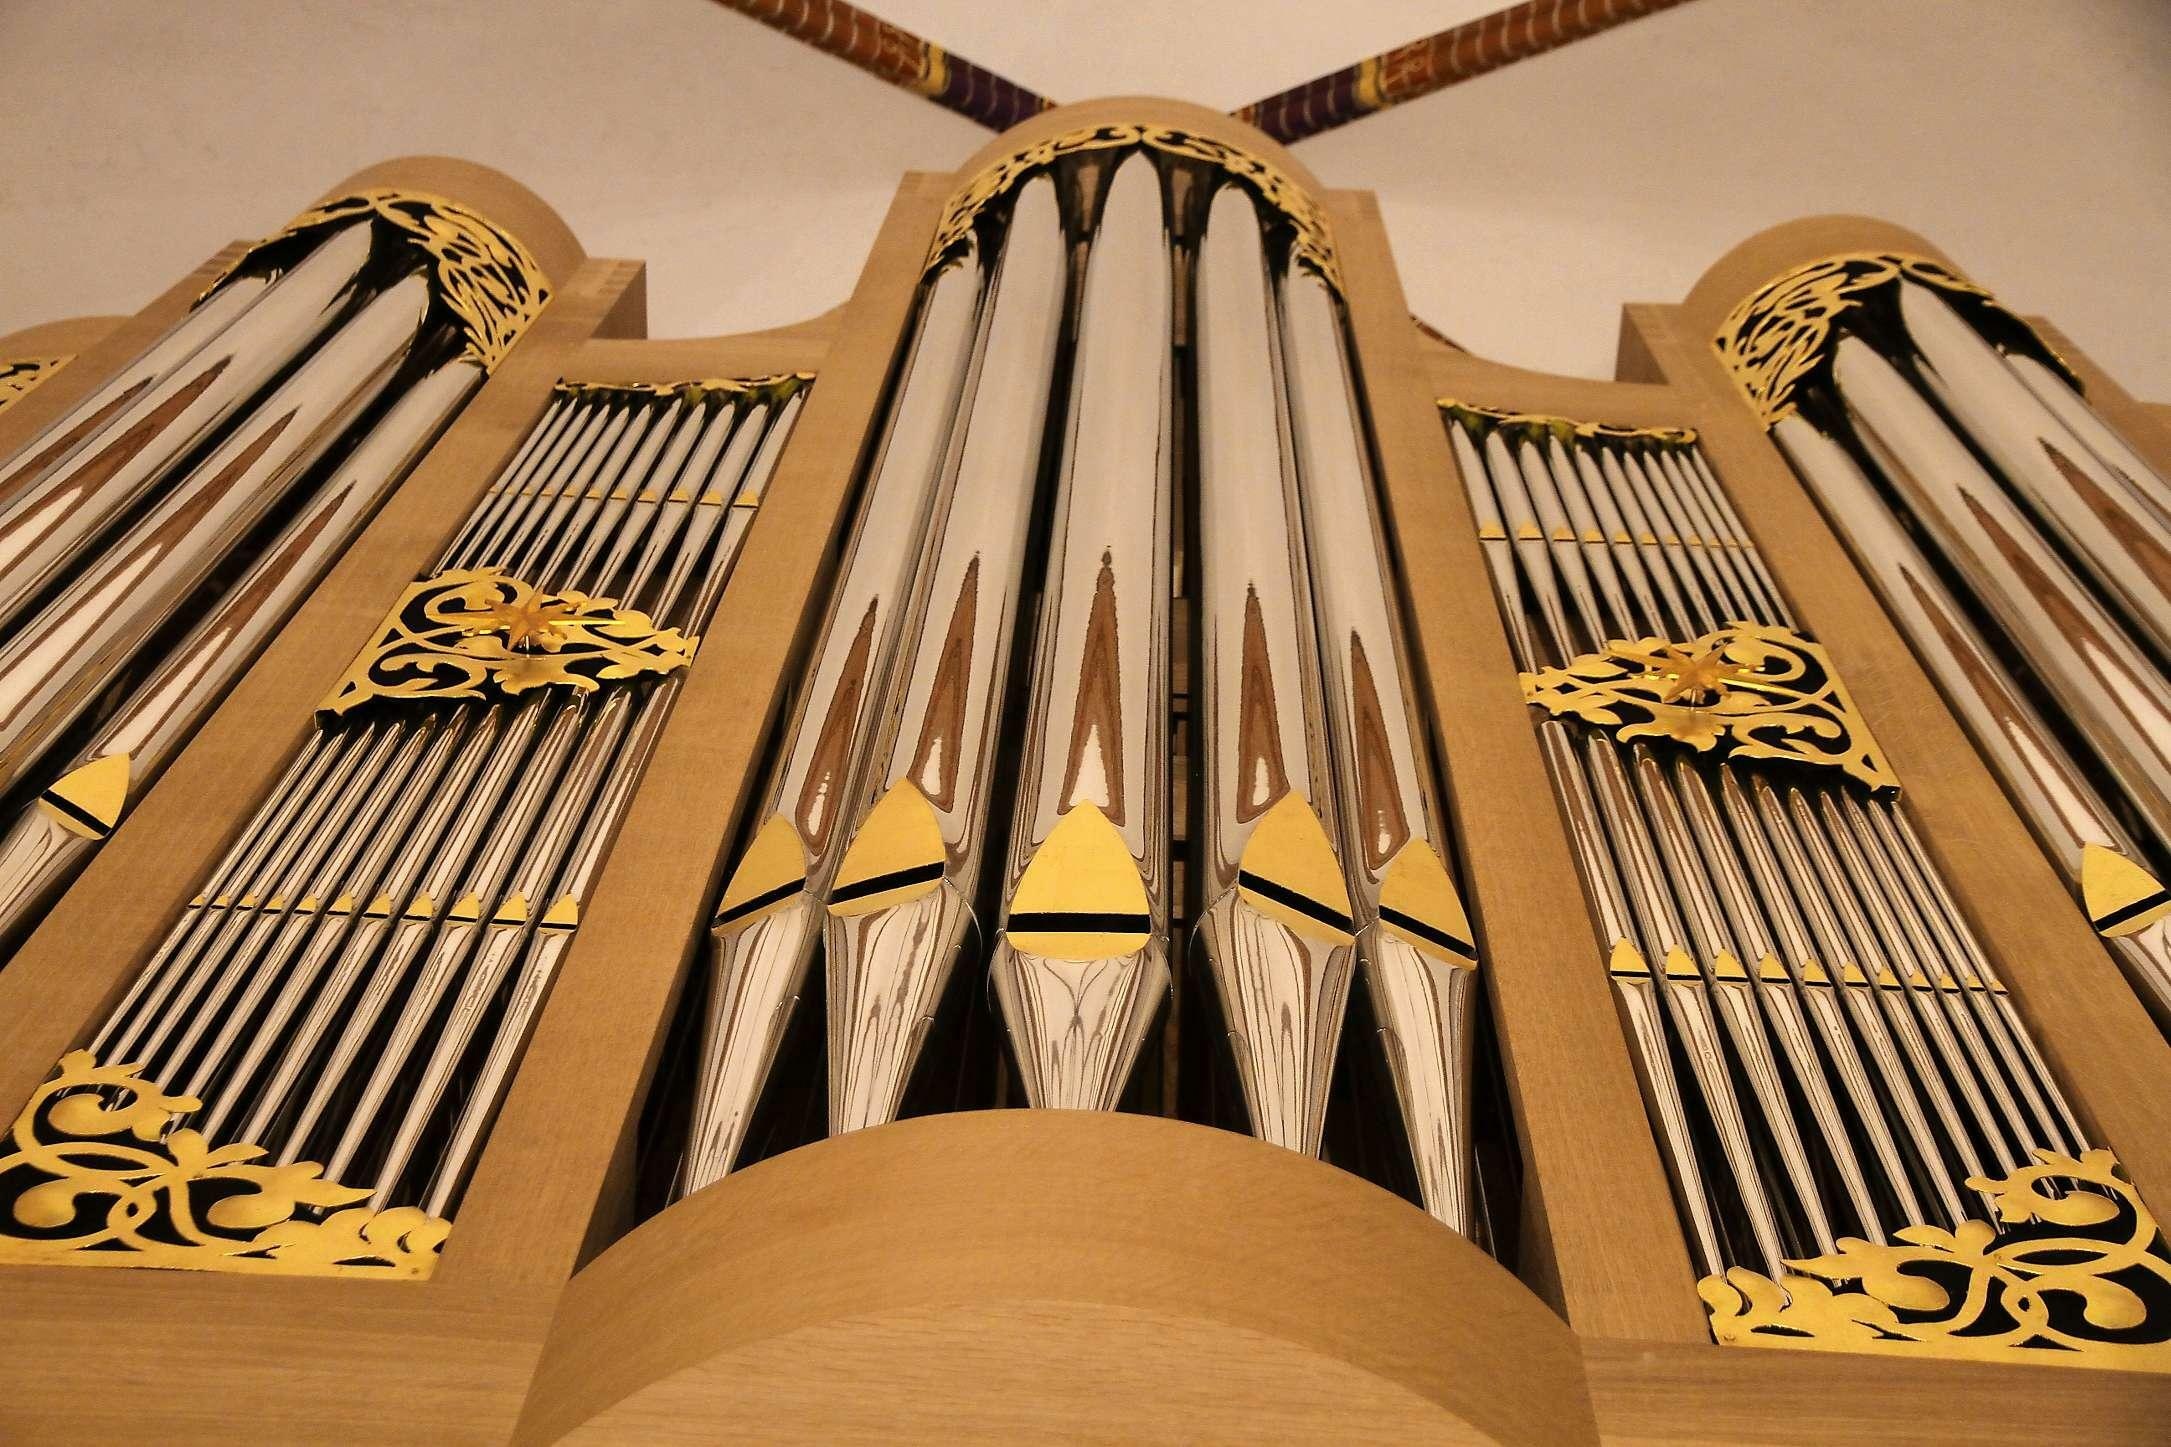 Pipe Organ: A musical instrument that produces sound by driving pressurized air through the tubes. 2180x1450 HD Background.